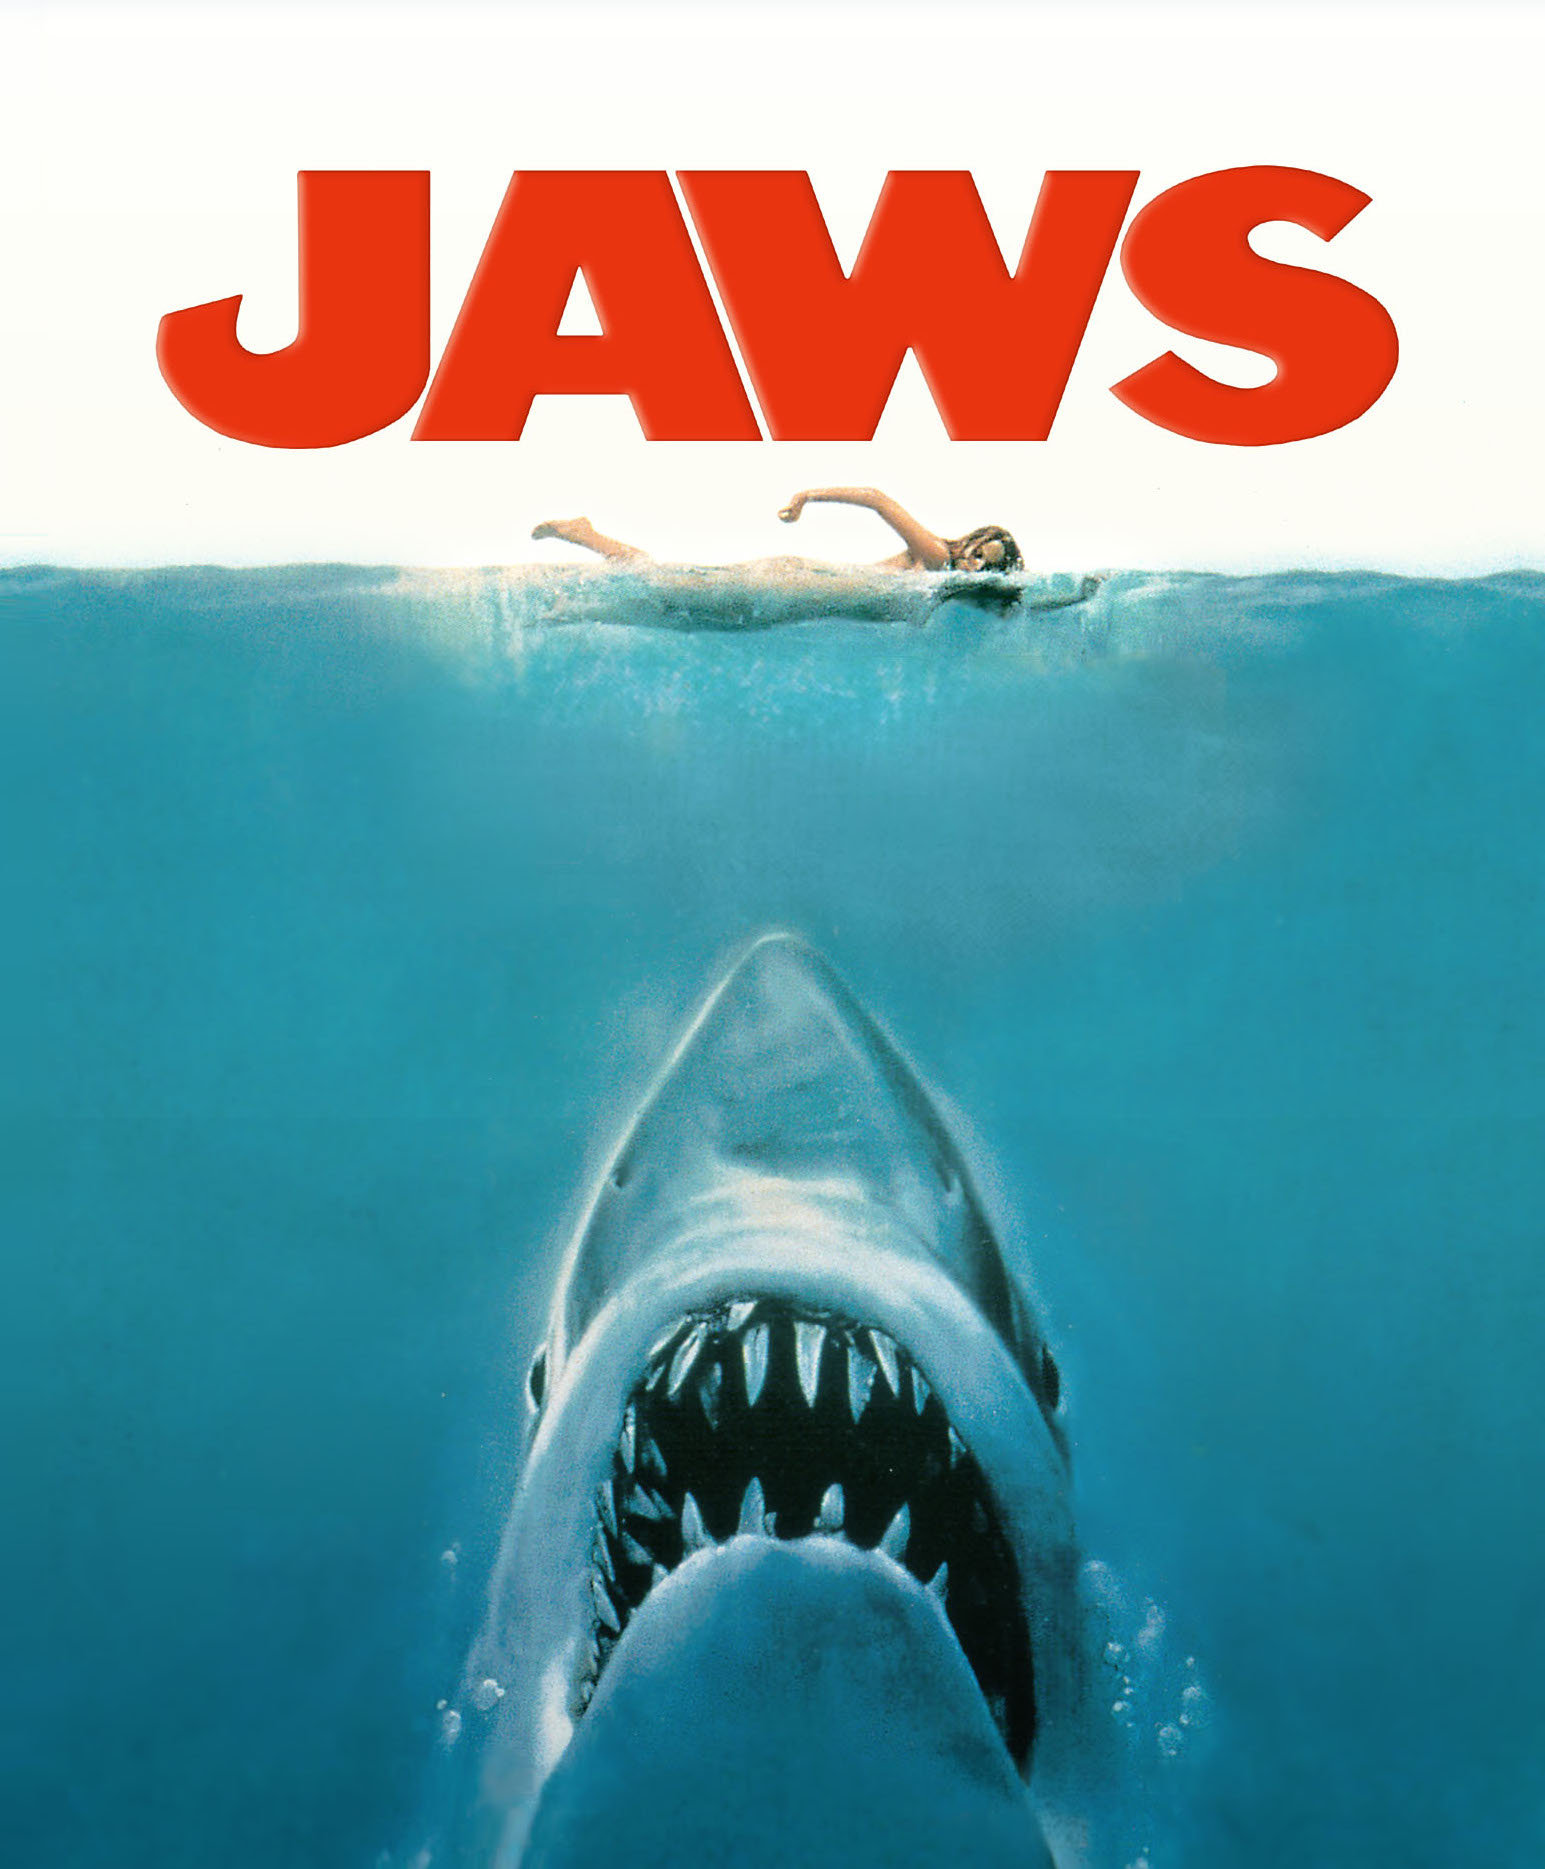 http://img2.wikia.nocookie.net/__cb20131015071208/jaws/images/d/da/Jaws-movie-poster.jpg